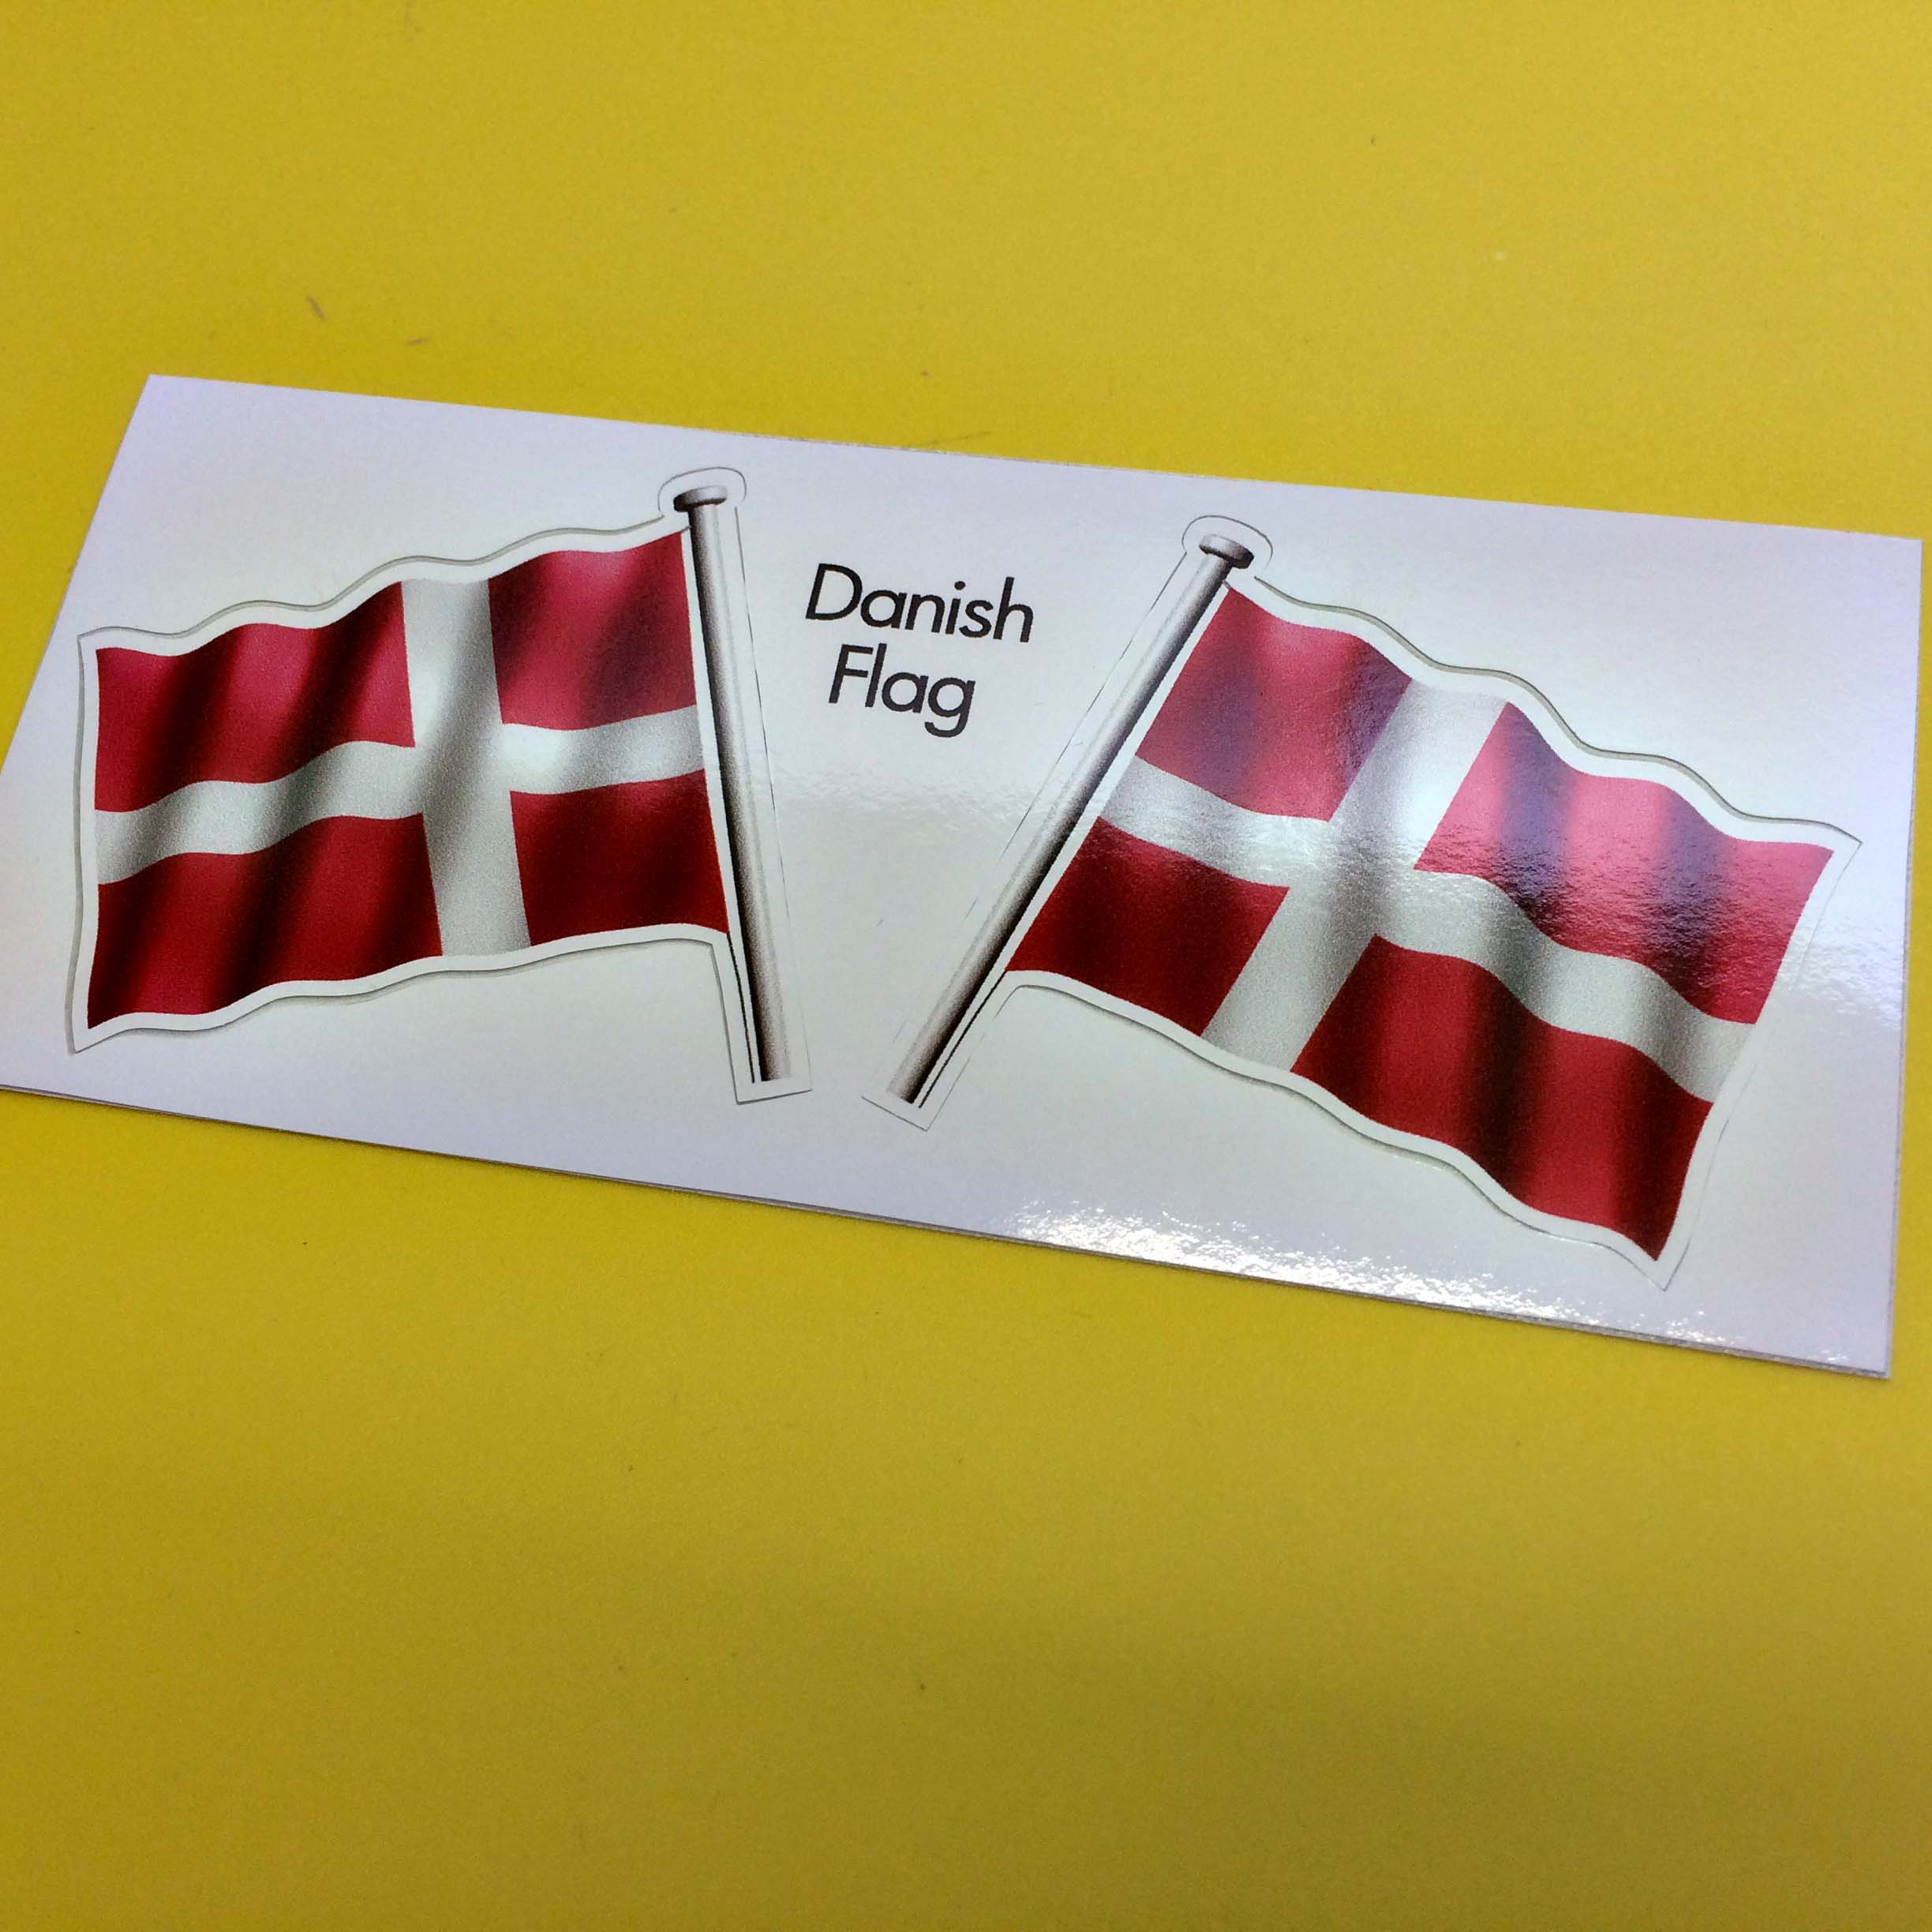 A wavy flag of Denmark on a pole. A white cross on a red background.